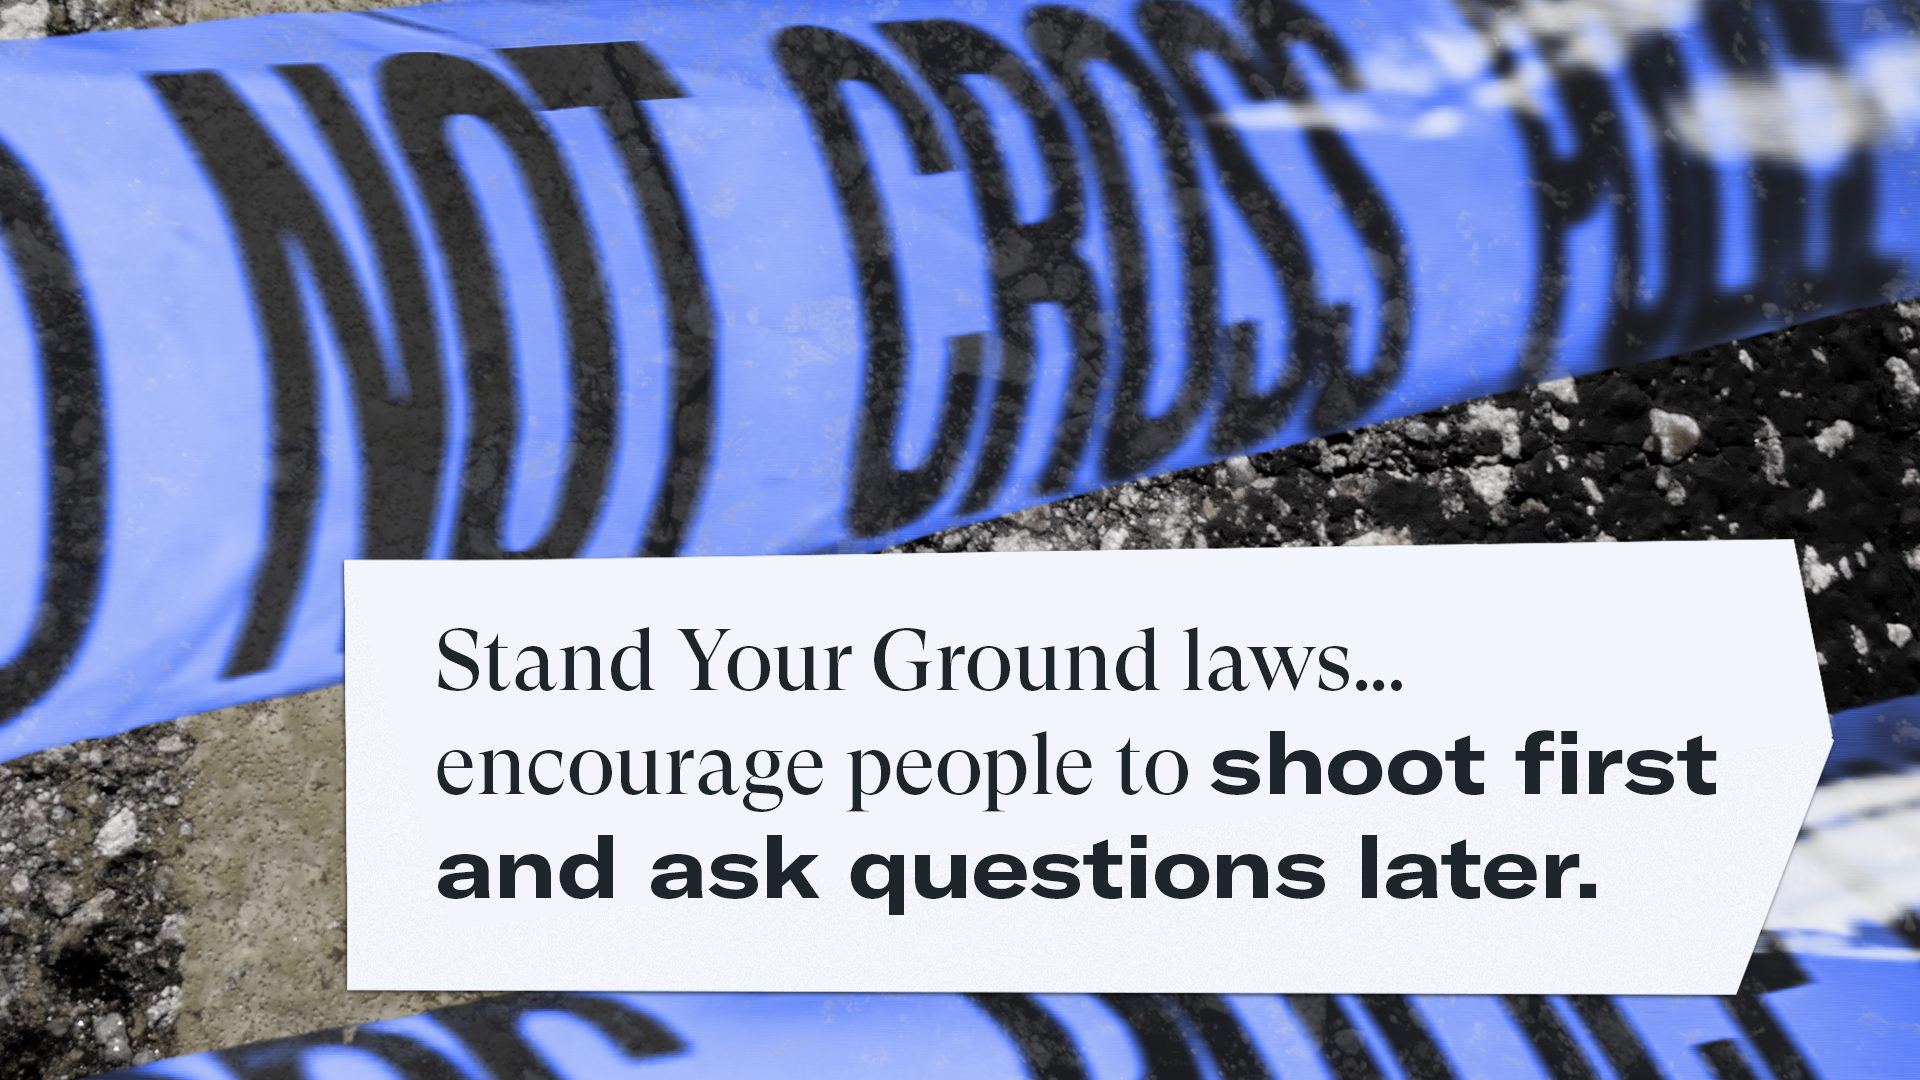 A License to Kill Shoot First Laws, also known as Stand Your Ground